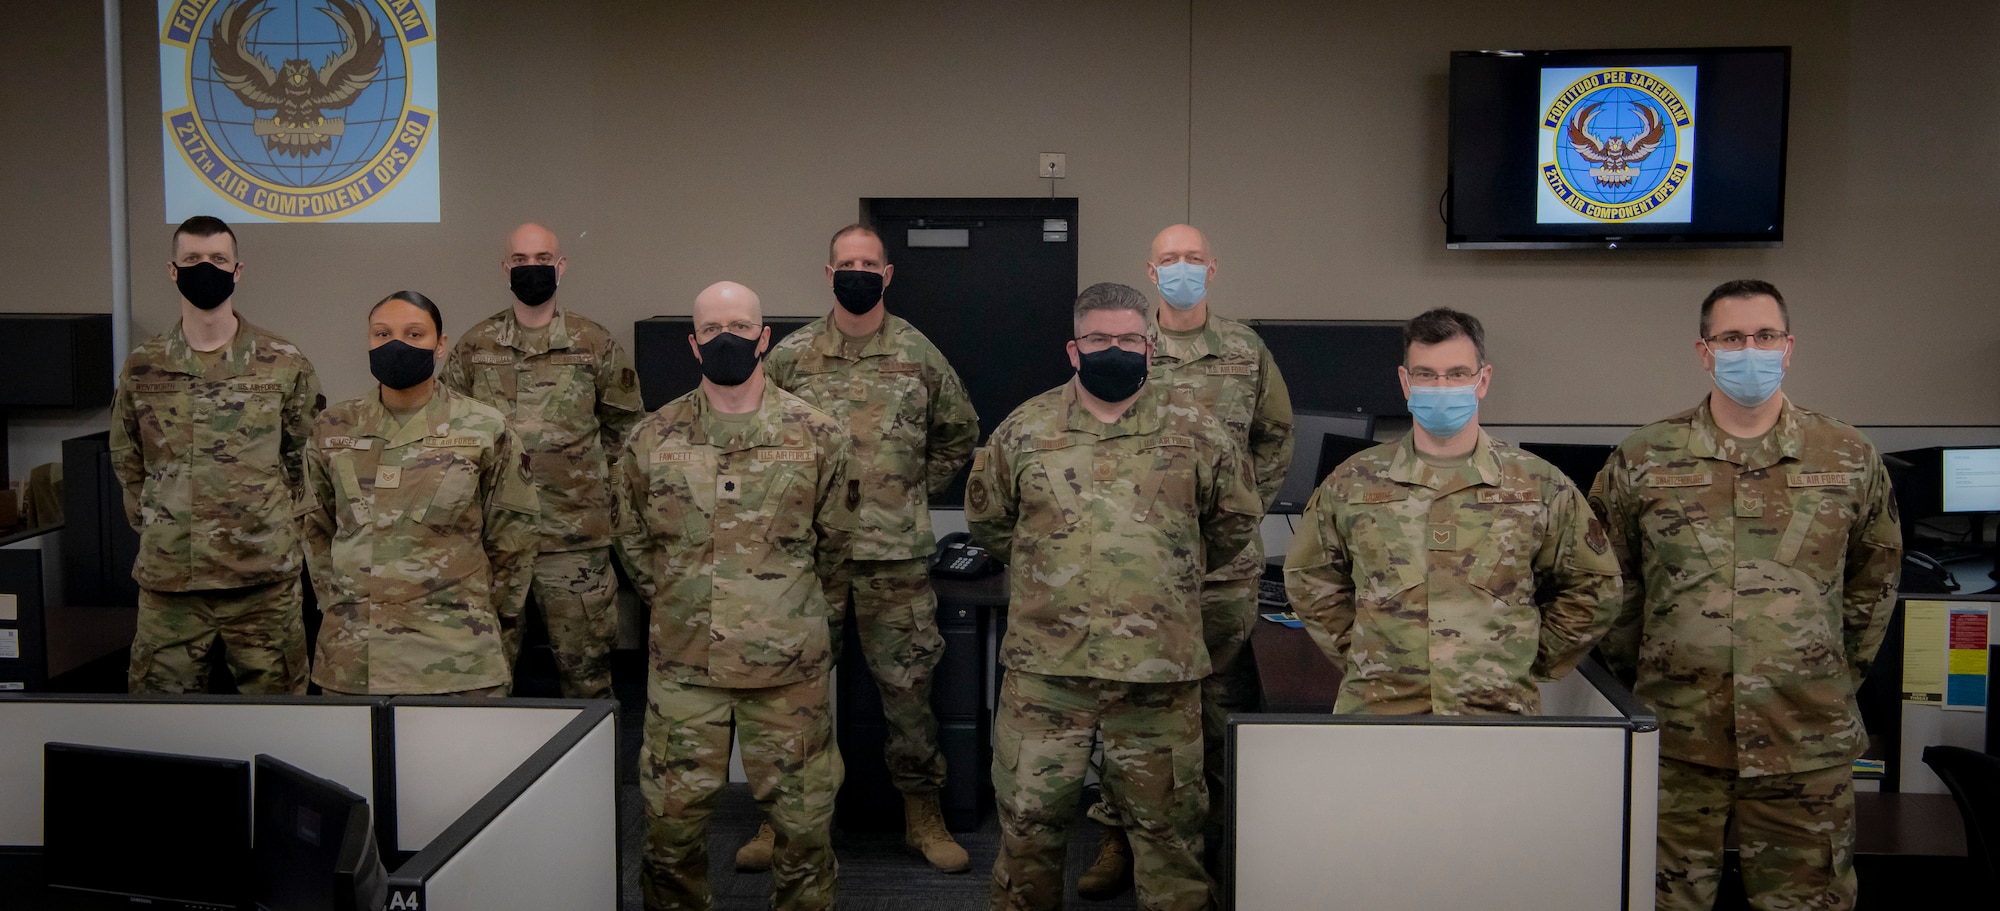 Members of the 110th Wing (pictured from left to right), Senior Airman Donovan Wentworth, 110th Communications Flight; Staff Sgt. Jennifer Rumsey, Tech. Sgt. Justin Oosterbaan, Lt. Col. Daniel Fawcett, Tech. Sgt. Robert Zellers, Master Sgt. Brian Leonard, Tech. Sgt. Lewis Banks, Staff Sgt. Robert Rainone, 217th Air Component Operations Squadron and Staff Sgt. Ryan Swartzendruber, the 110th Operations Group, stands for a team photo on April 29, 2021, at Battle Creek Air National Guard Base, Battle Creek, Mich.